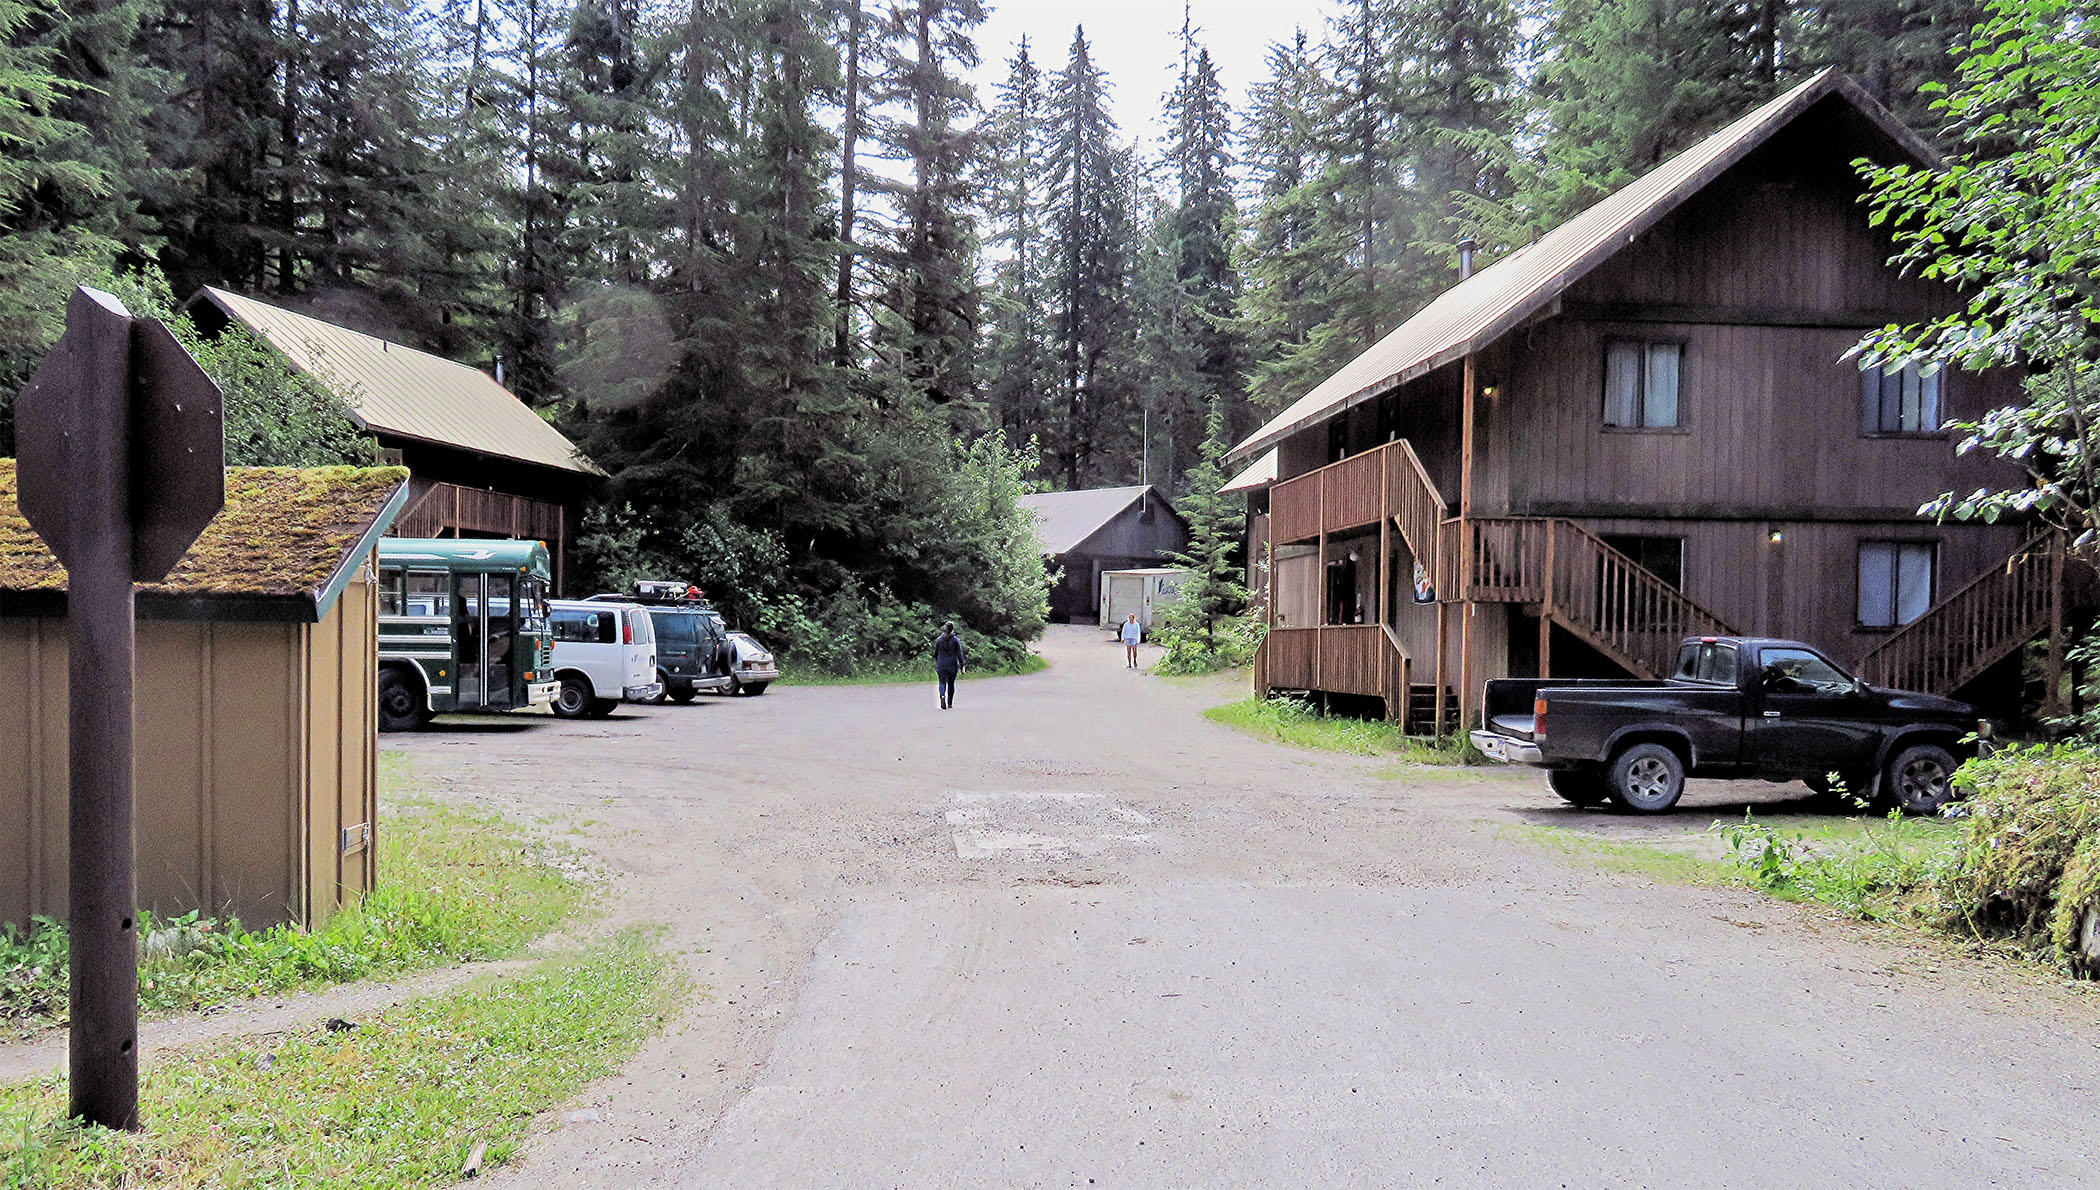 View of parking lot and several brown-sided buildings. Coniferous trees block the full view of the buildings and surround the scene.